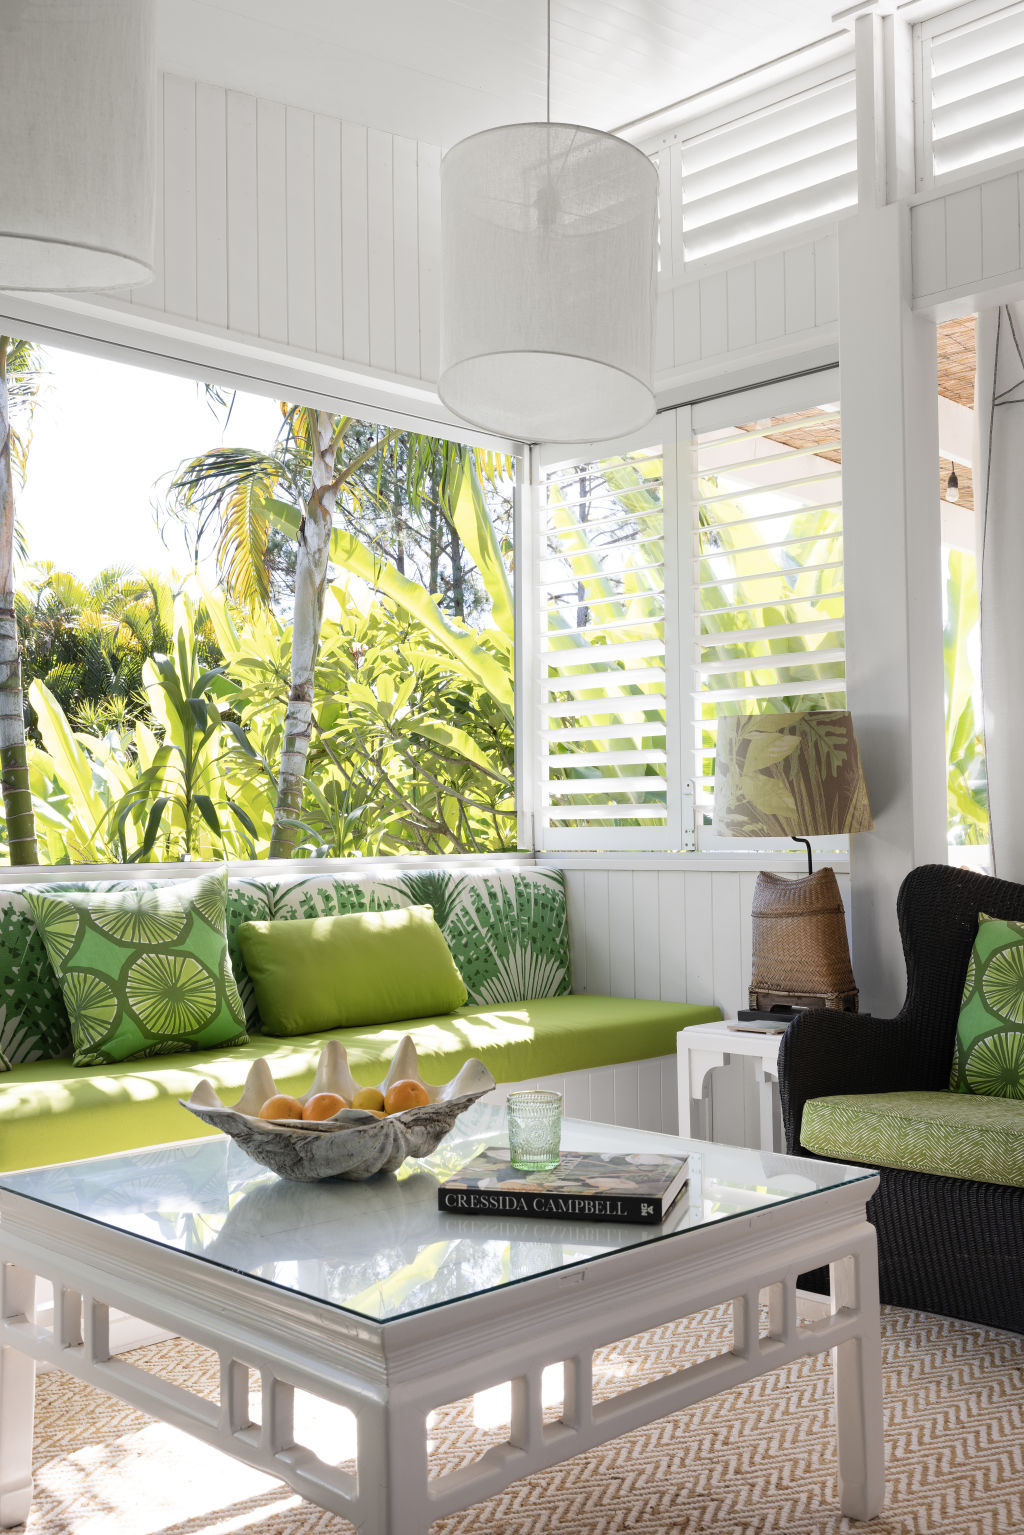 The three-bedroom house allows easy movement between indoor and outdoor living zones. Photo: The Design Villa